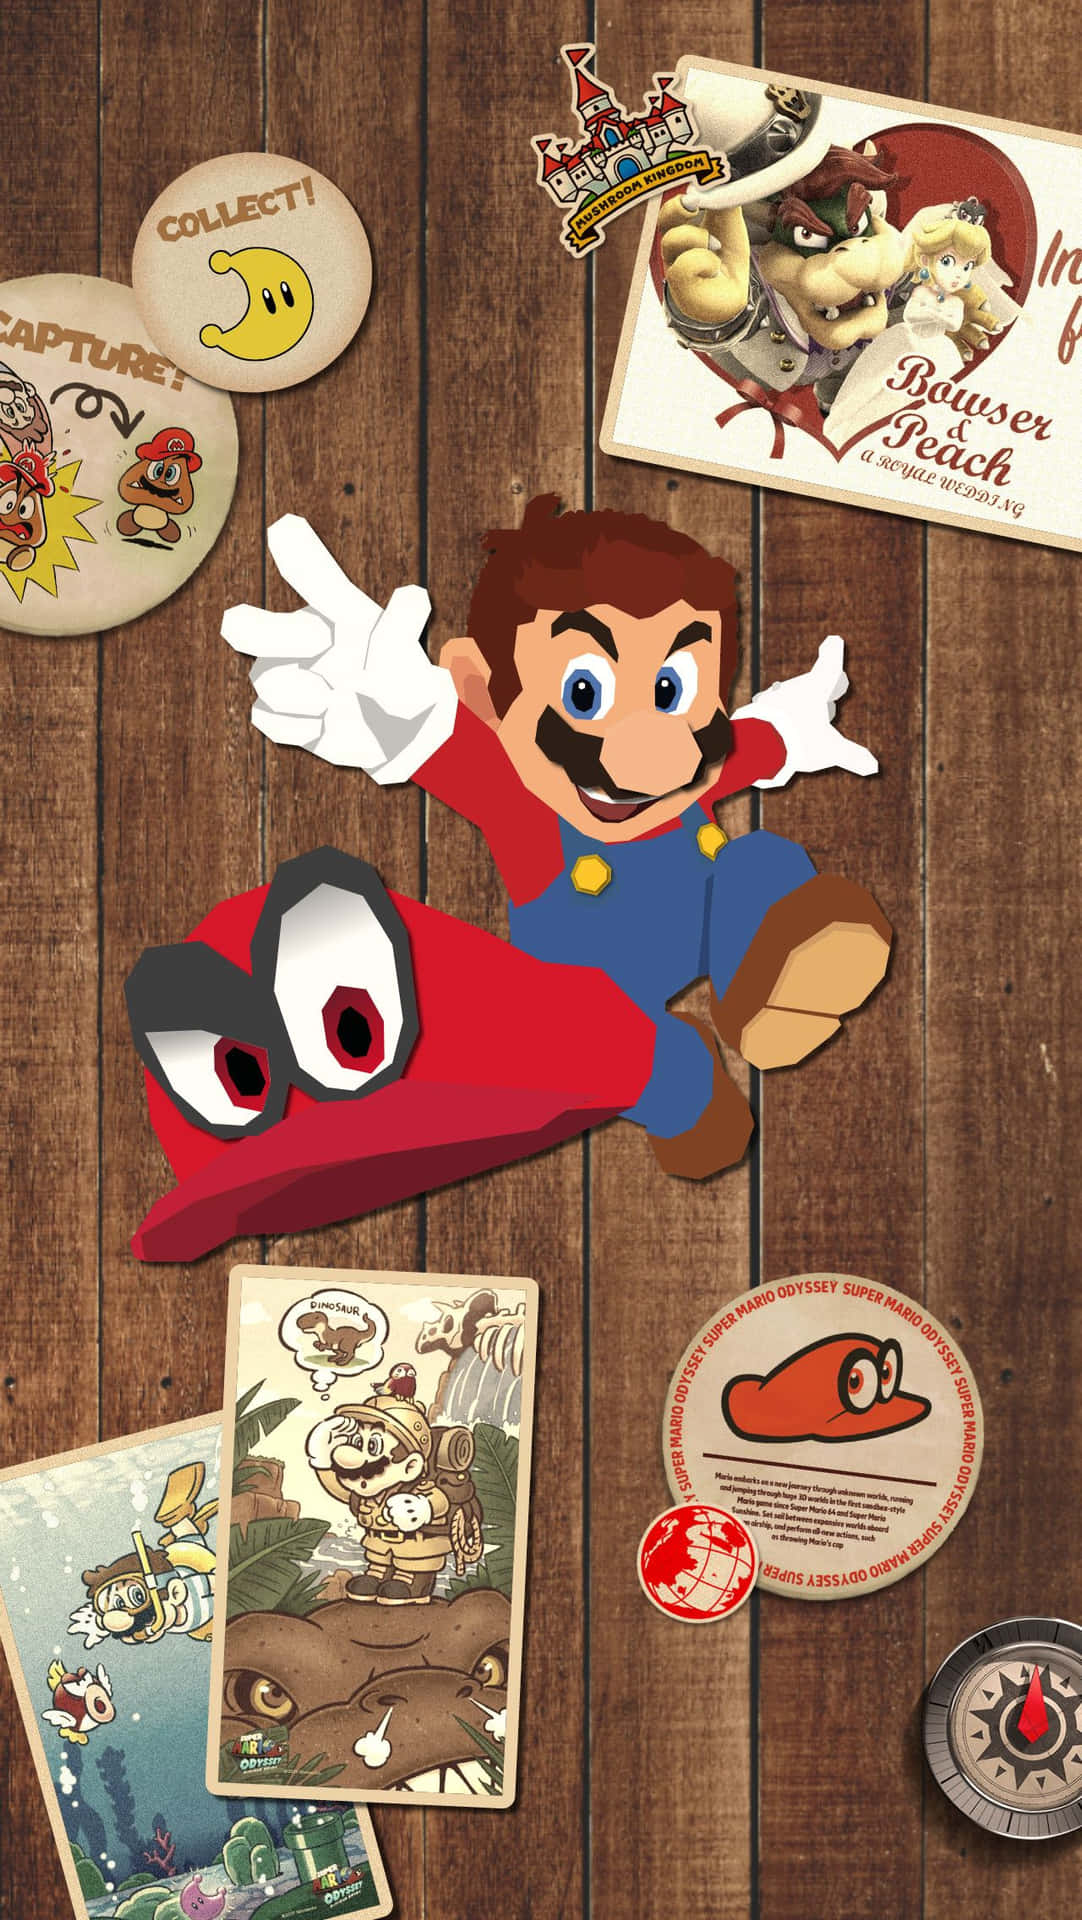 Take the world of Super Mario with you wherever you go! Wallpaper